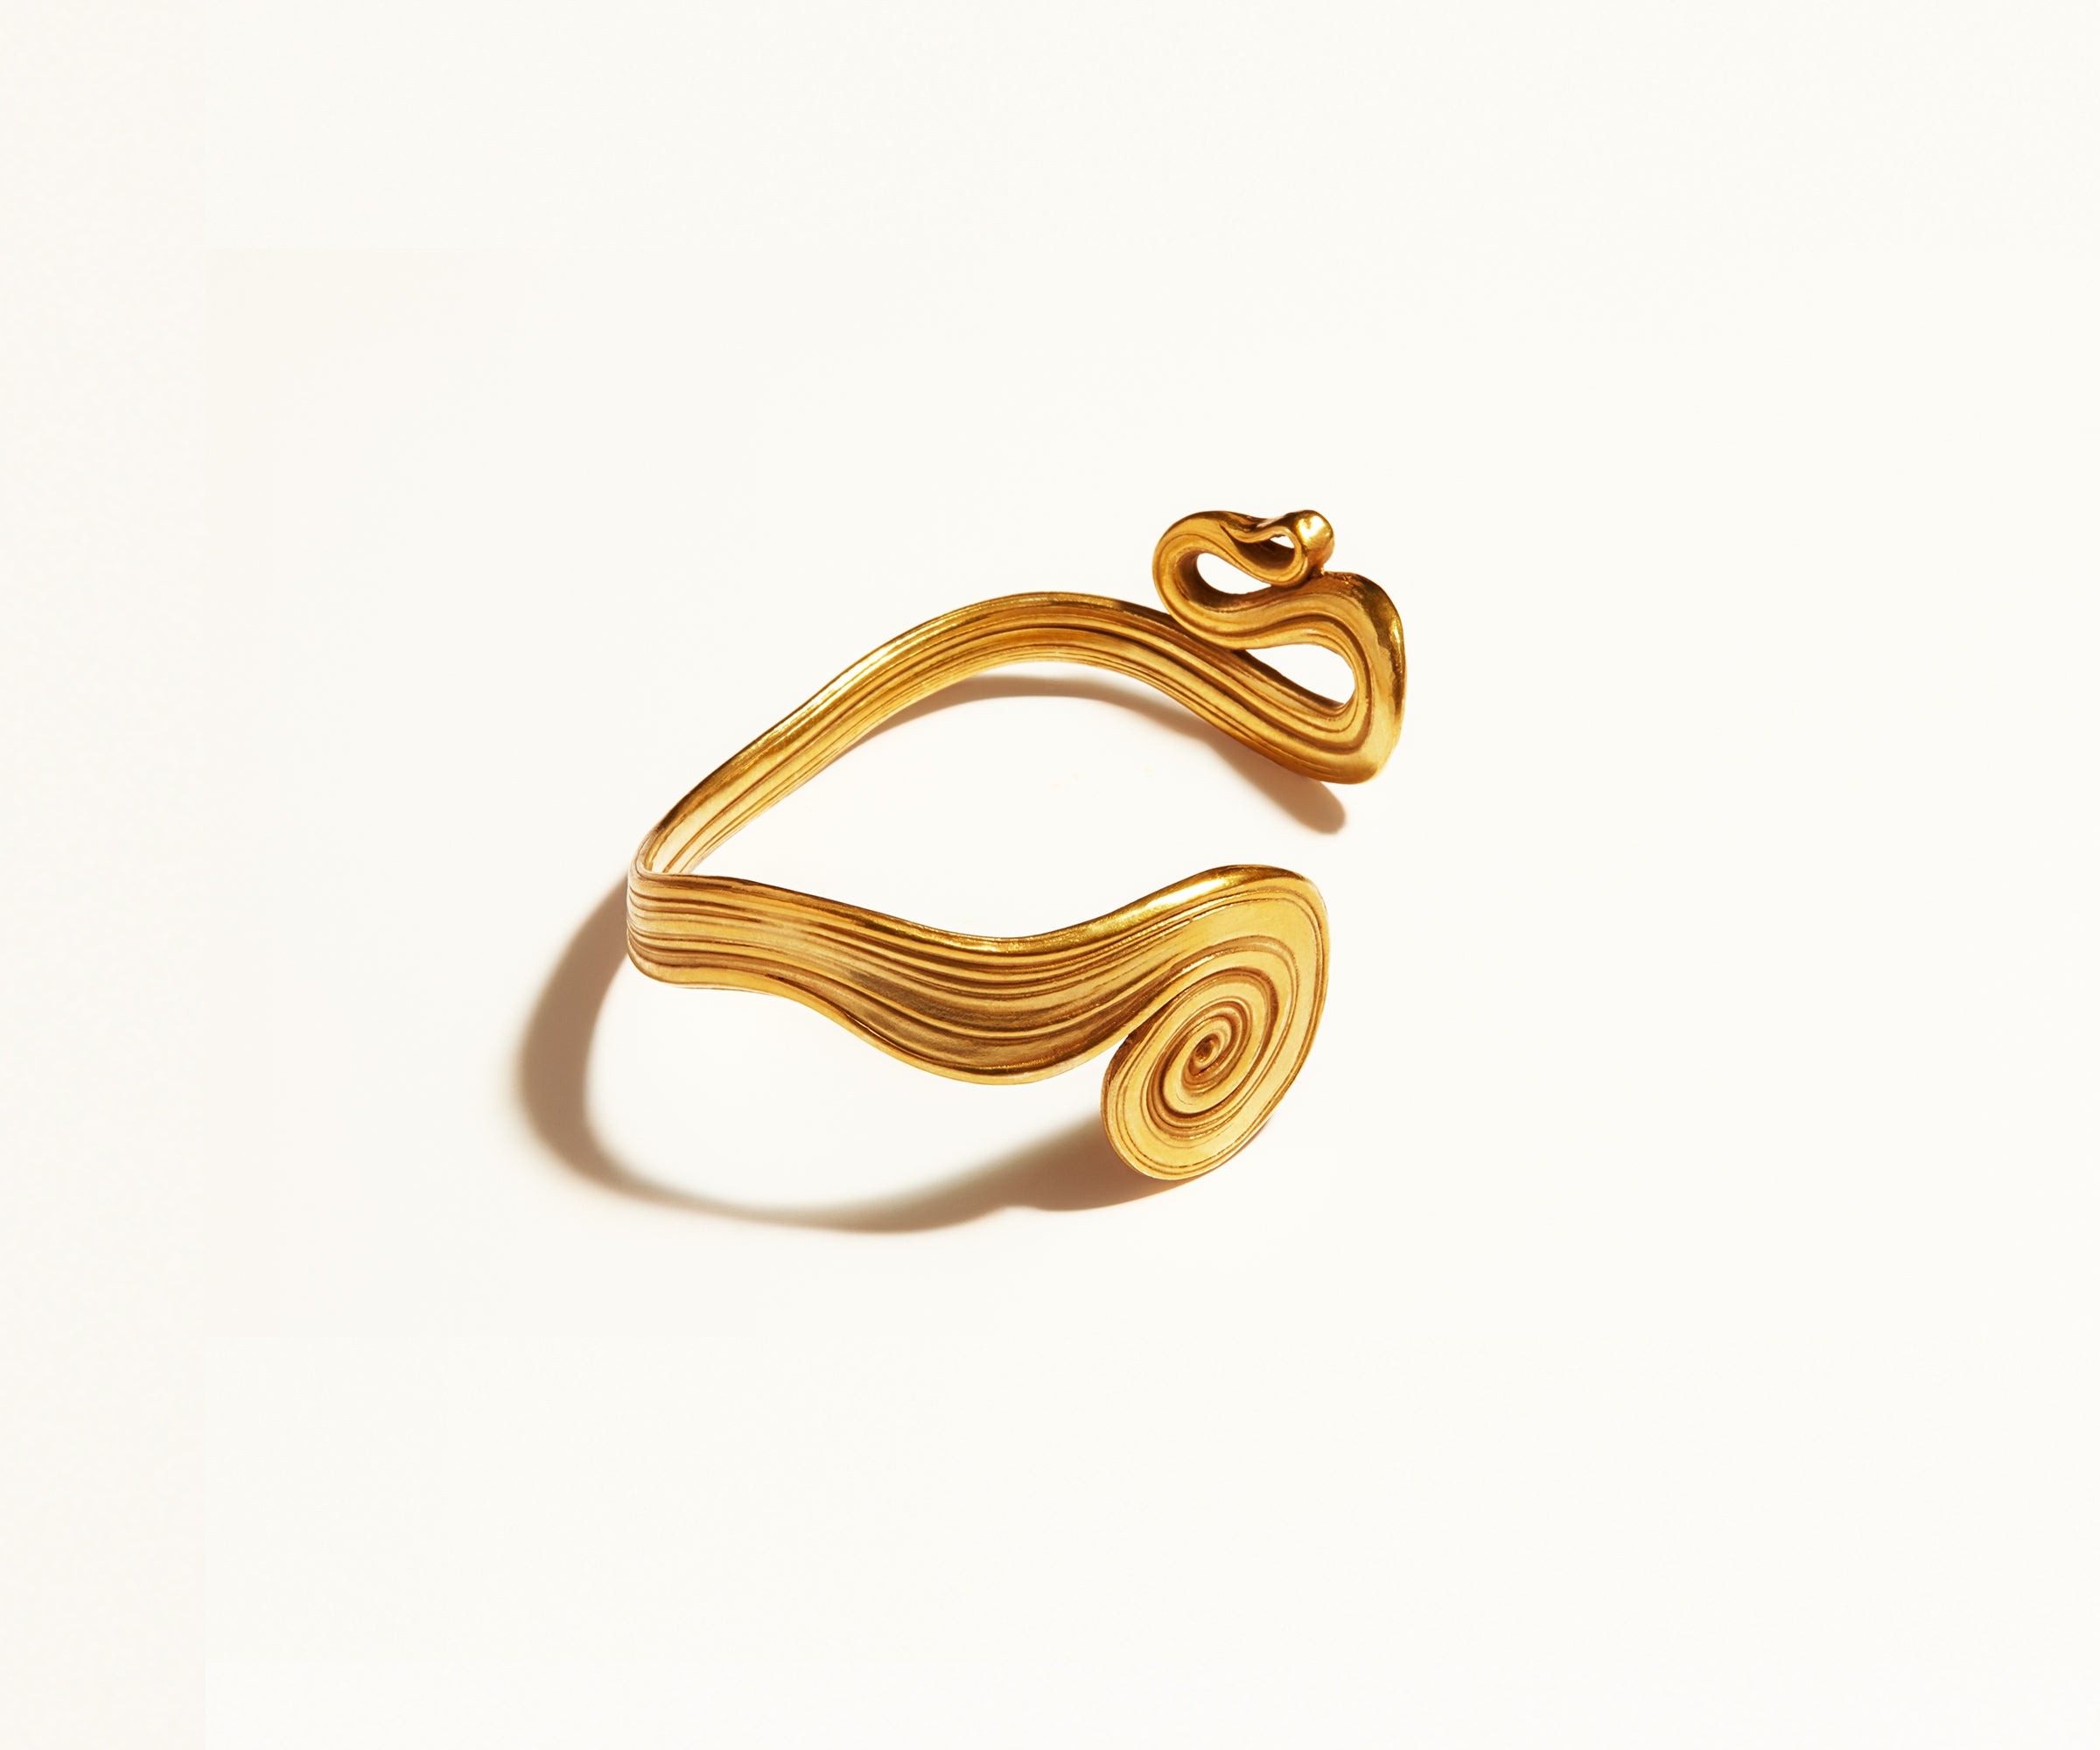 An 18K gold bracelet titled ‘Spiral Bracelet No. 10’ from the early 1970s made in Denmark by fine jewellery designer Arje Griegst. The cuff bracelet resembles an abstract, wavy piece of Ancient Roman jewellery: a wide cuff with ribbed lines running through the gold that forms a coil spiral at either end.